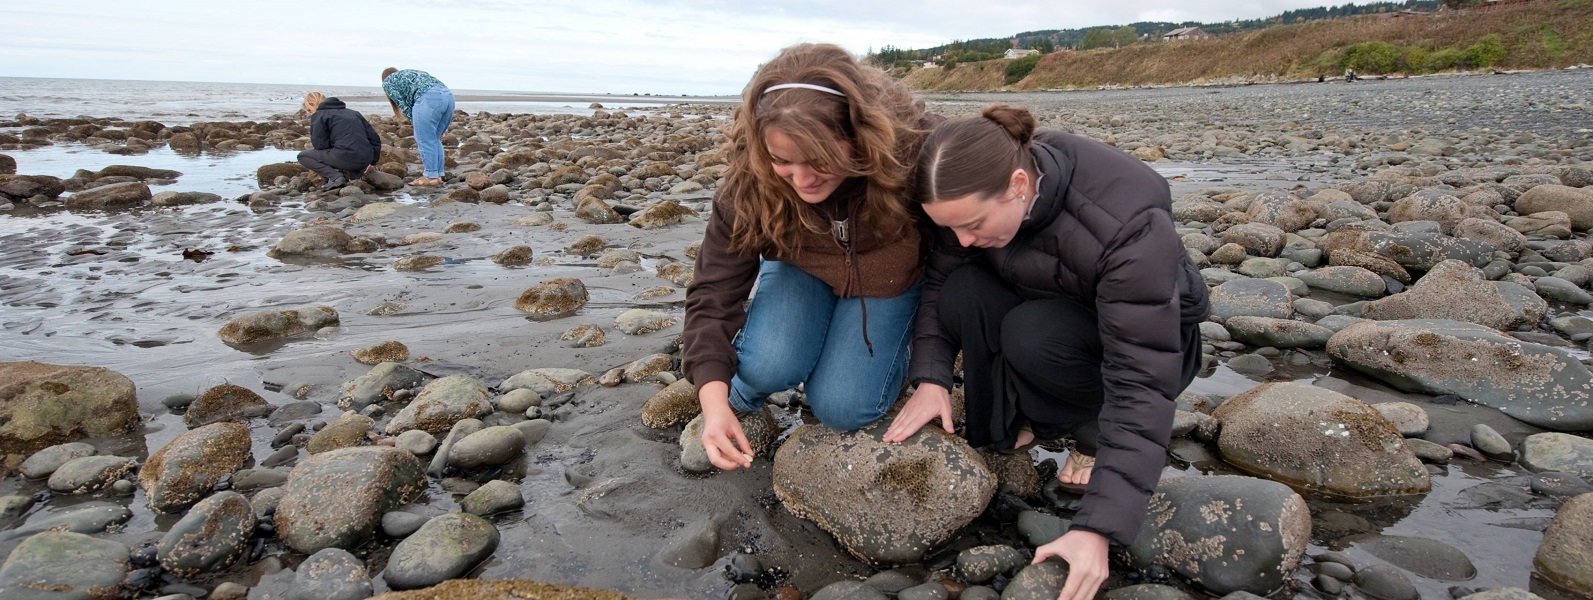 On Bishops Beach in Homer, two female KBC students are examining a rock in the tidal zone with two other students in the distance.